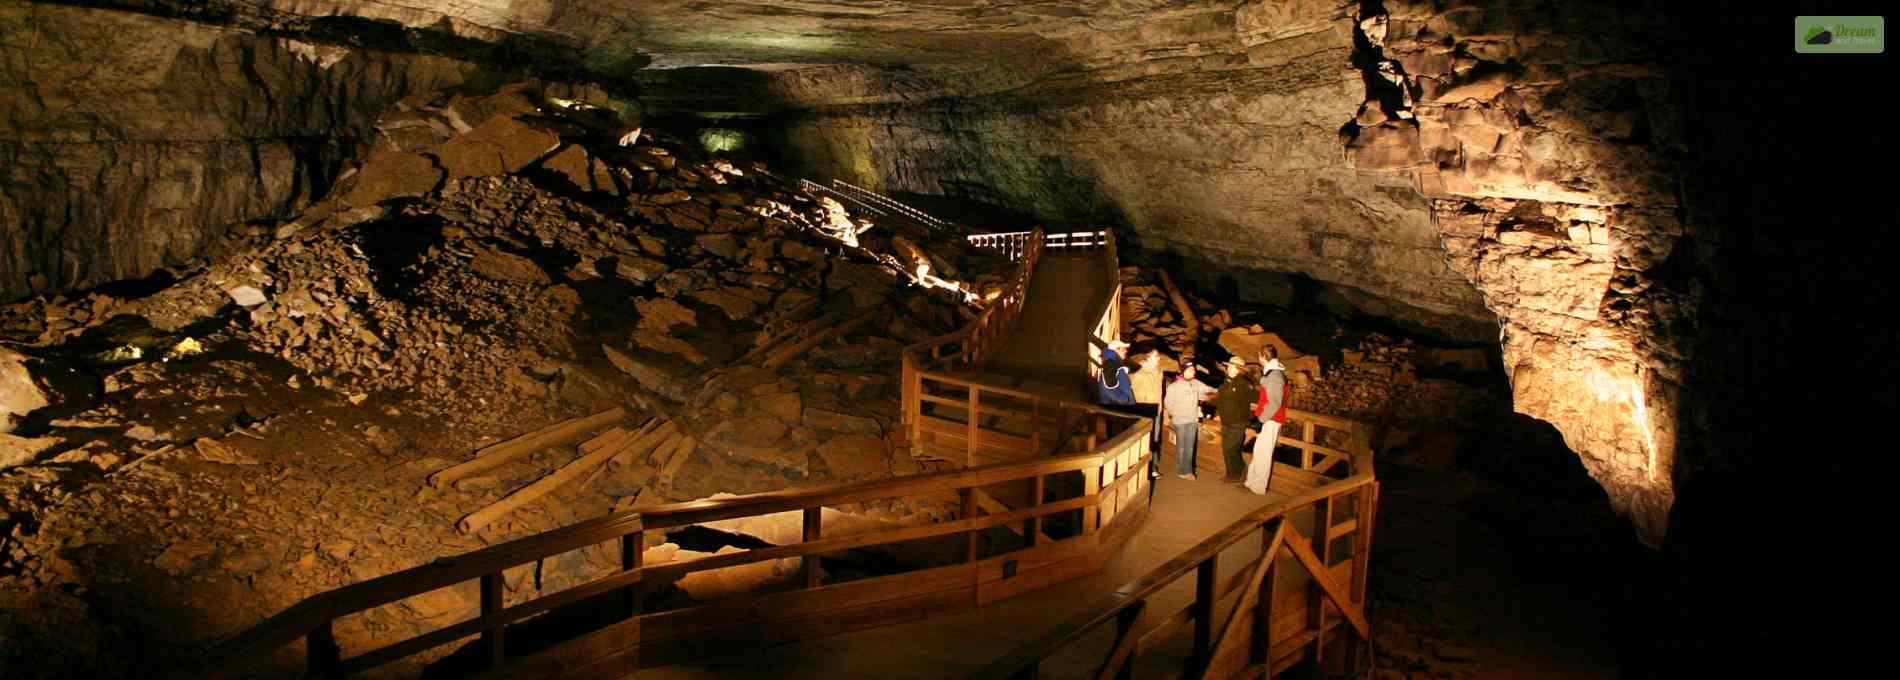 Mammoth Cave National Park camping